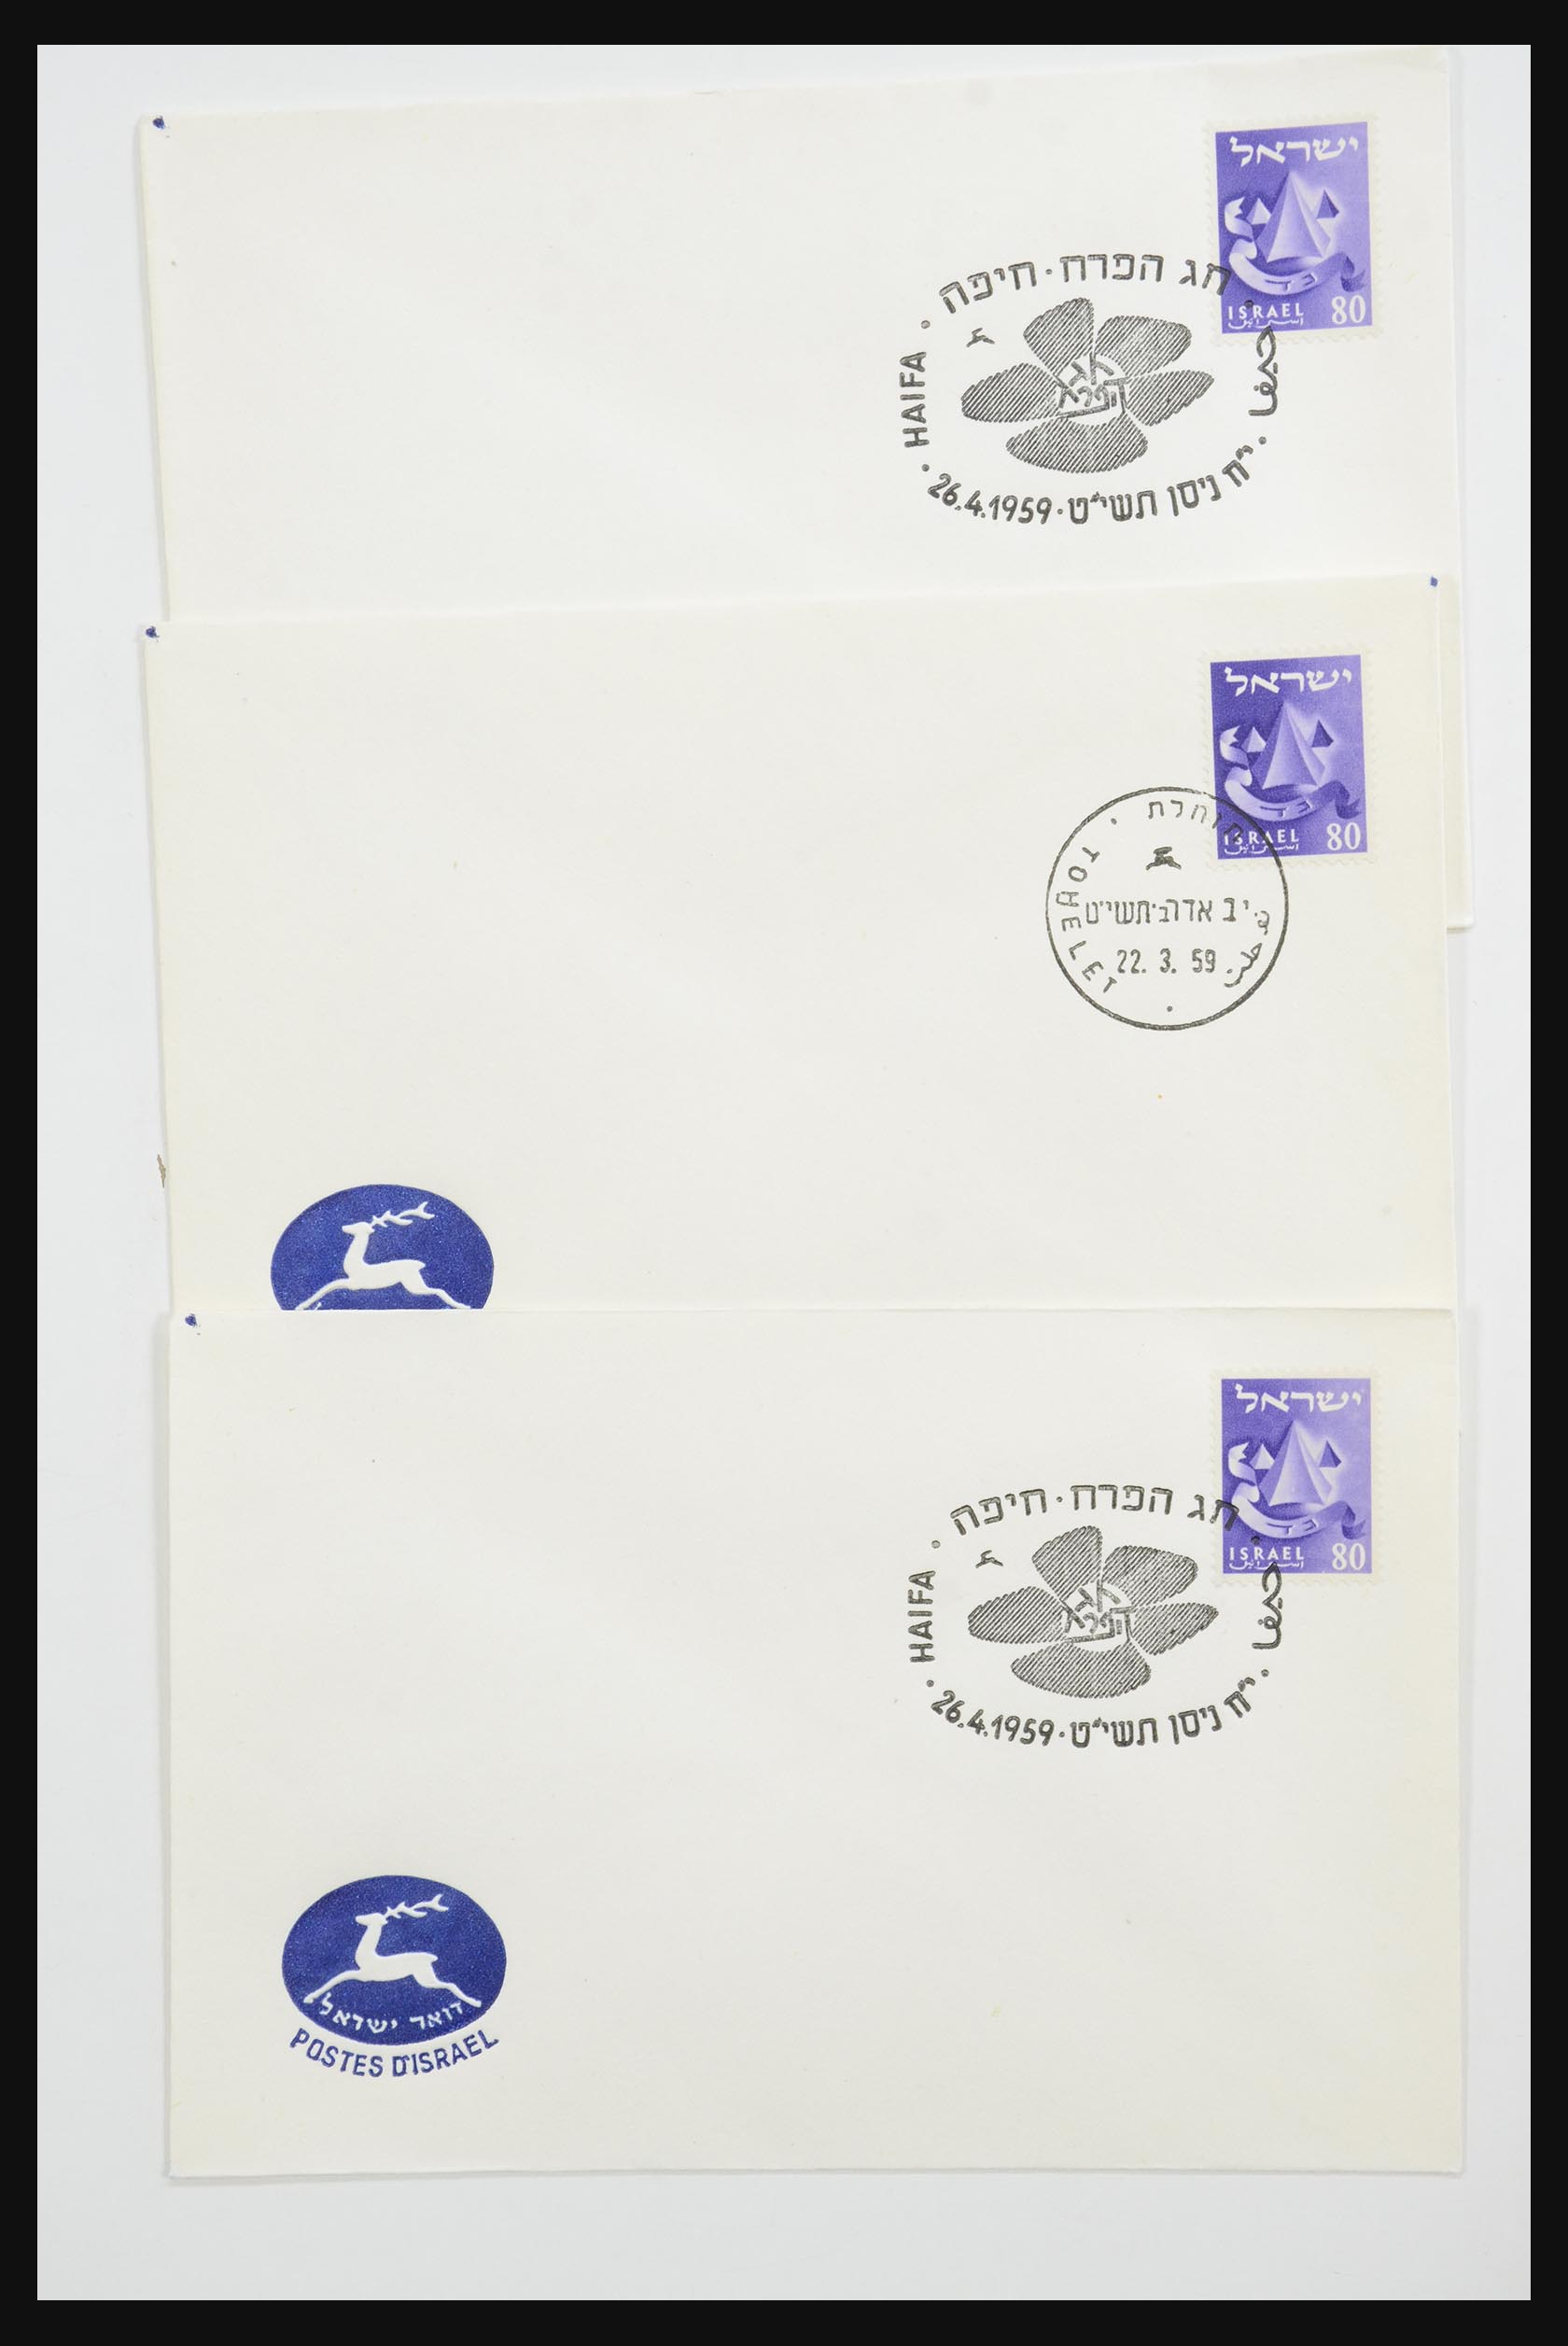 31924 019 - 31924 Israël fdc-collectie 1957-2003.